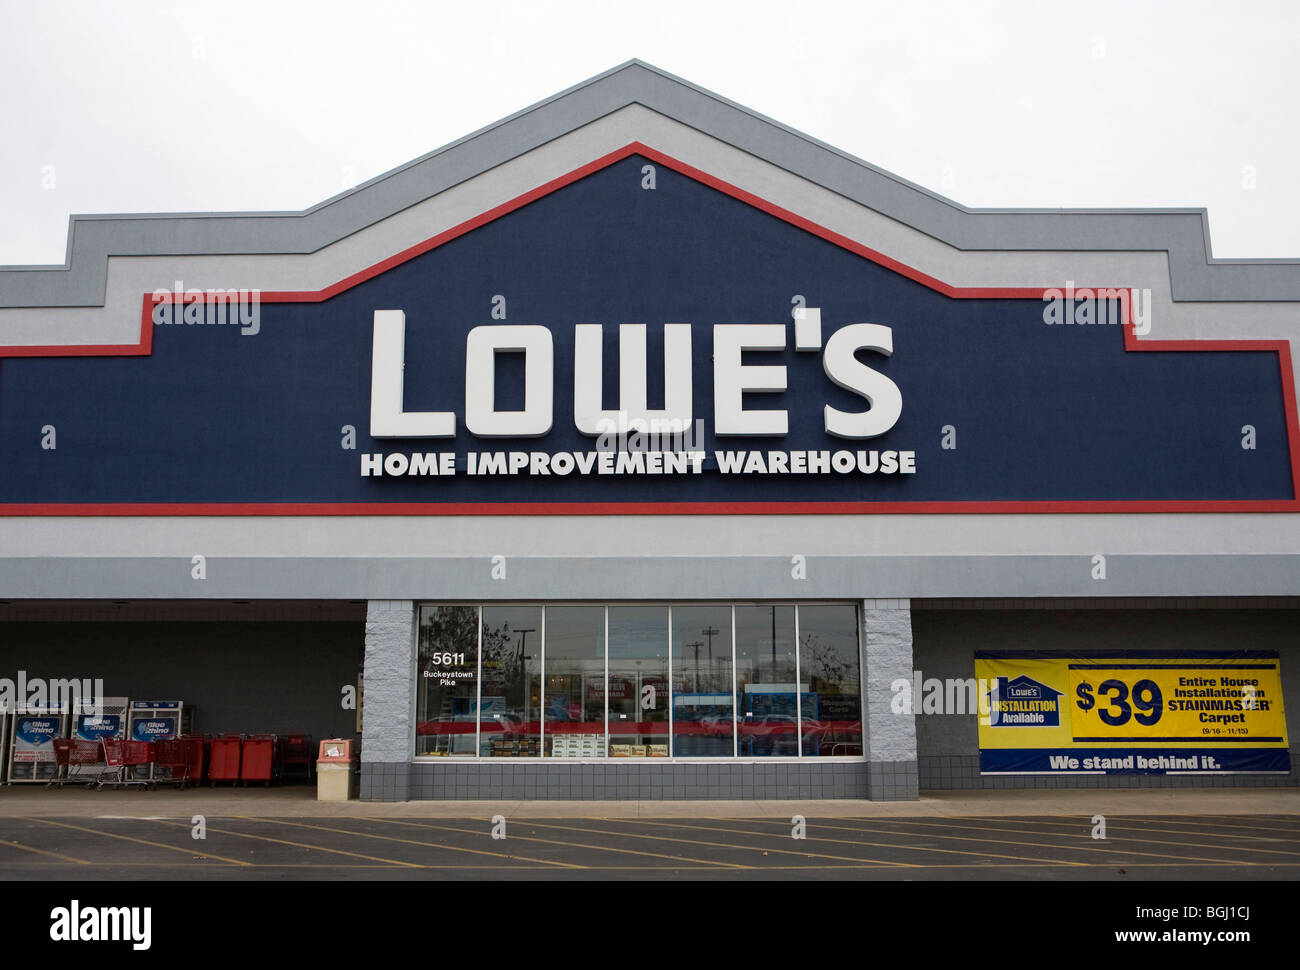 nearest lowe's home improvement to me